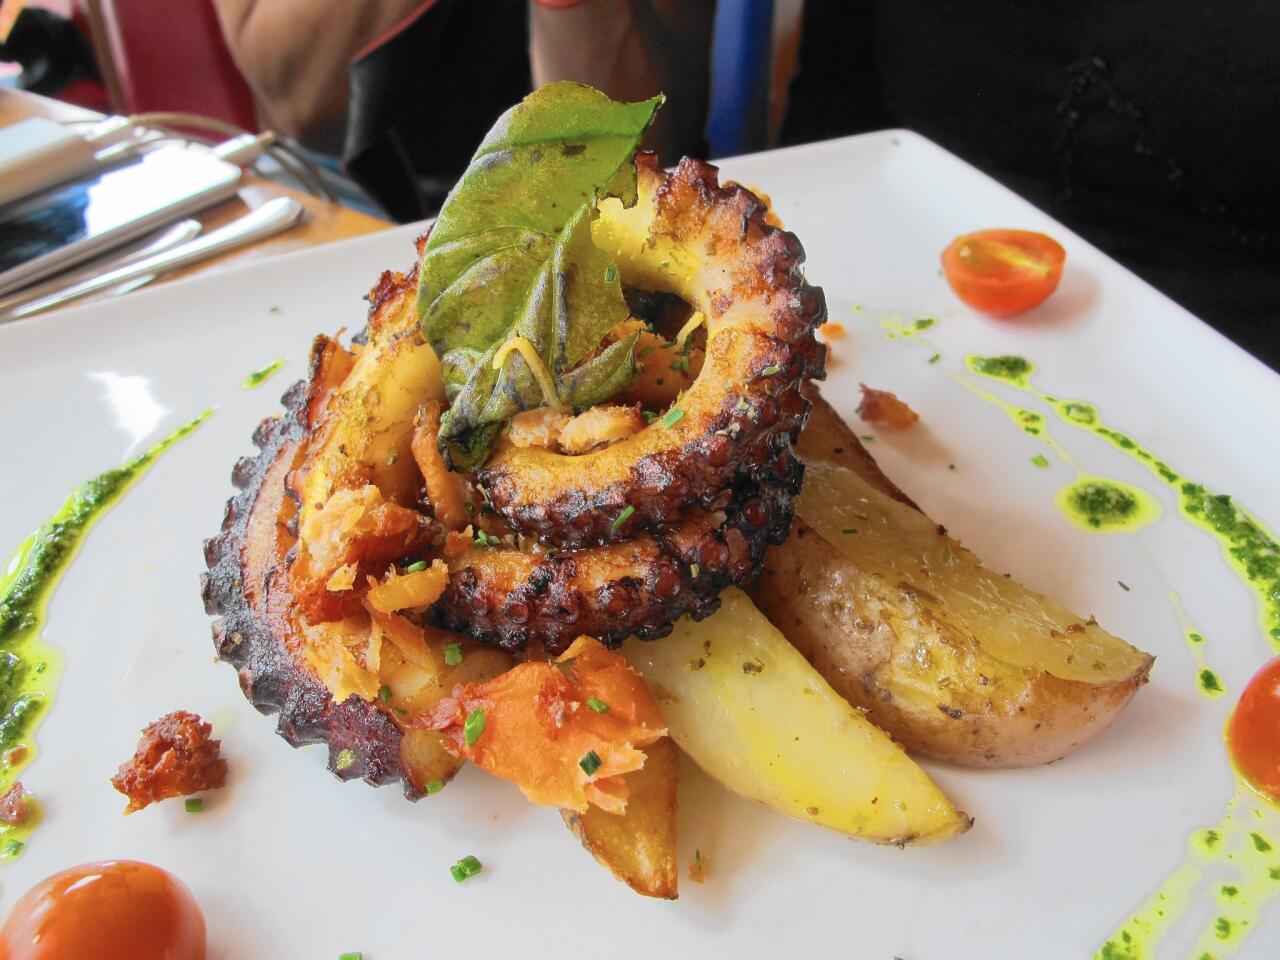 Grilled octopus is served over potatoes at Oda Pacifico restaurant in Valparaiso, Chile. This dish is typical of Chilean seafood preparations that take advantage of the freshness and flavor of the catch from the country’s coastal waters.